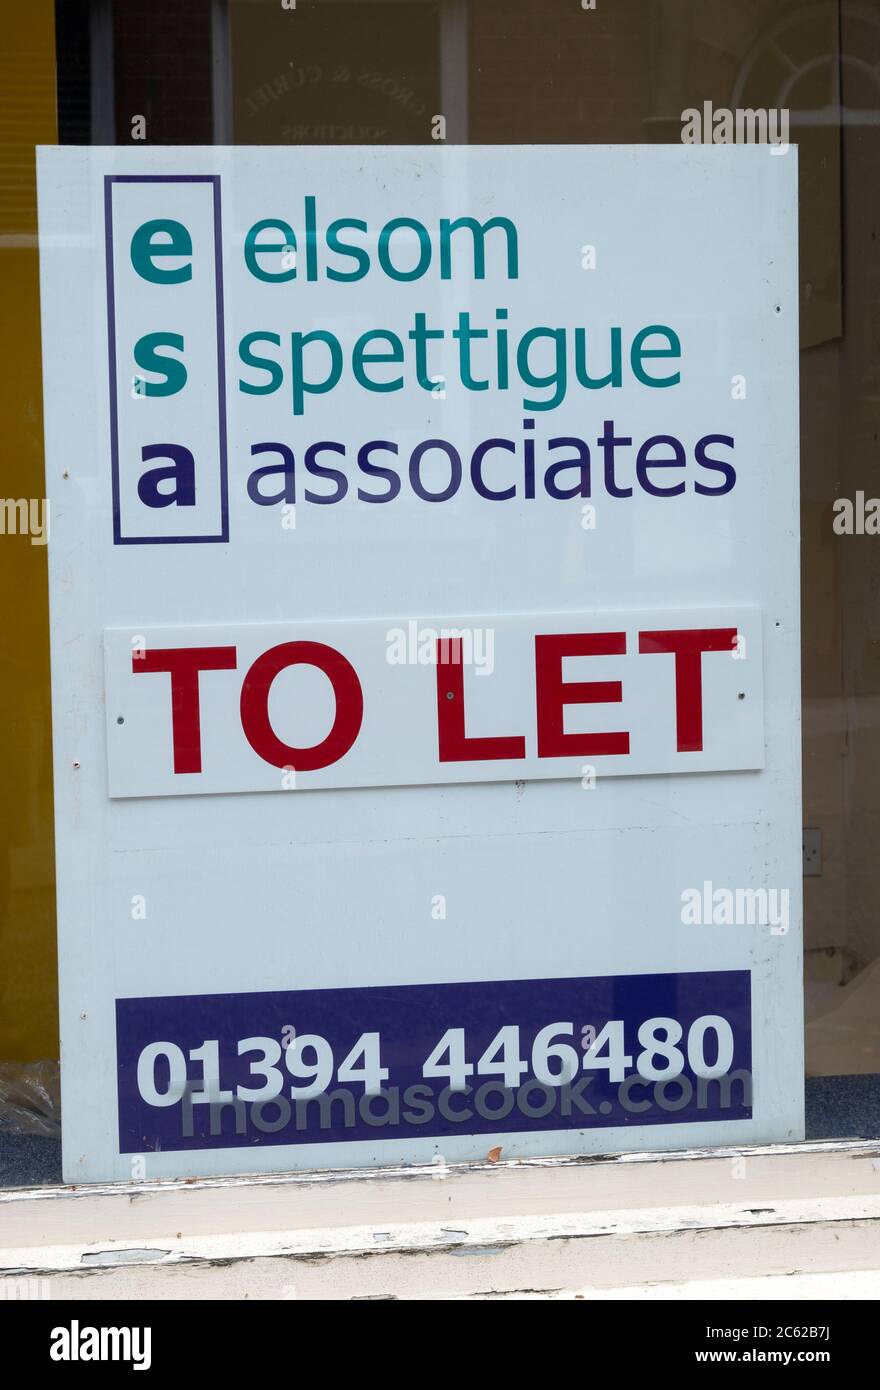 To Let estate agent sign in empty shop window, Elsom Spettigue Associates, Woodbridge, Suffolk, England Stock Photo